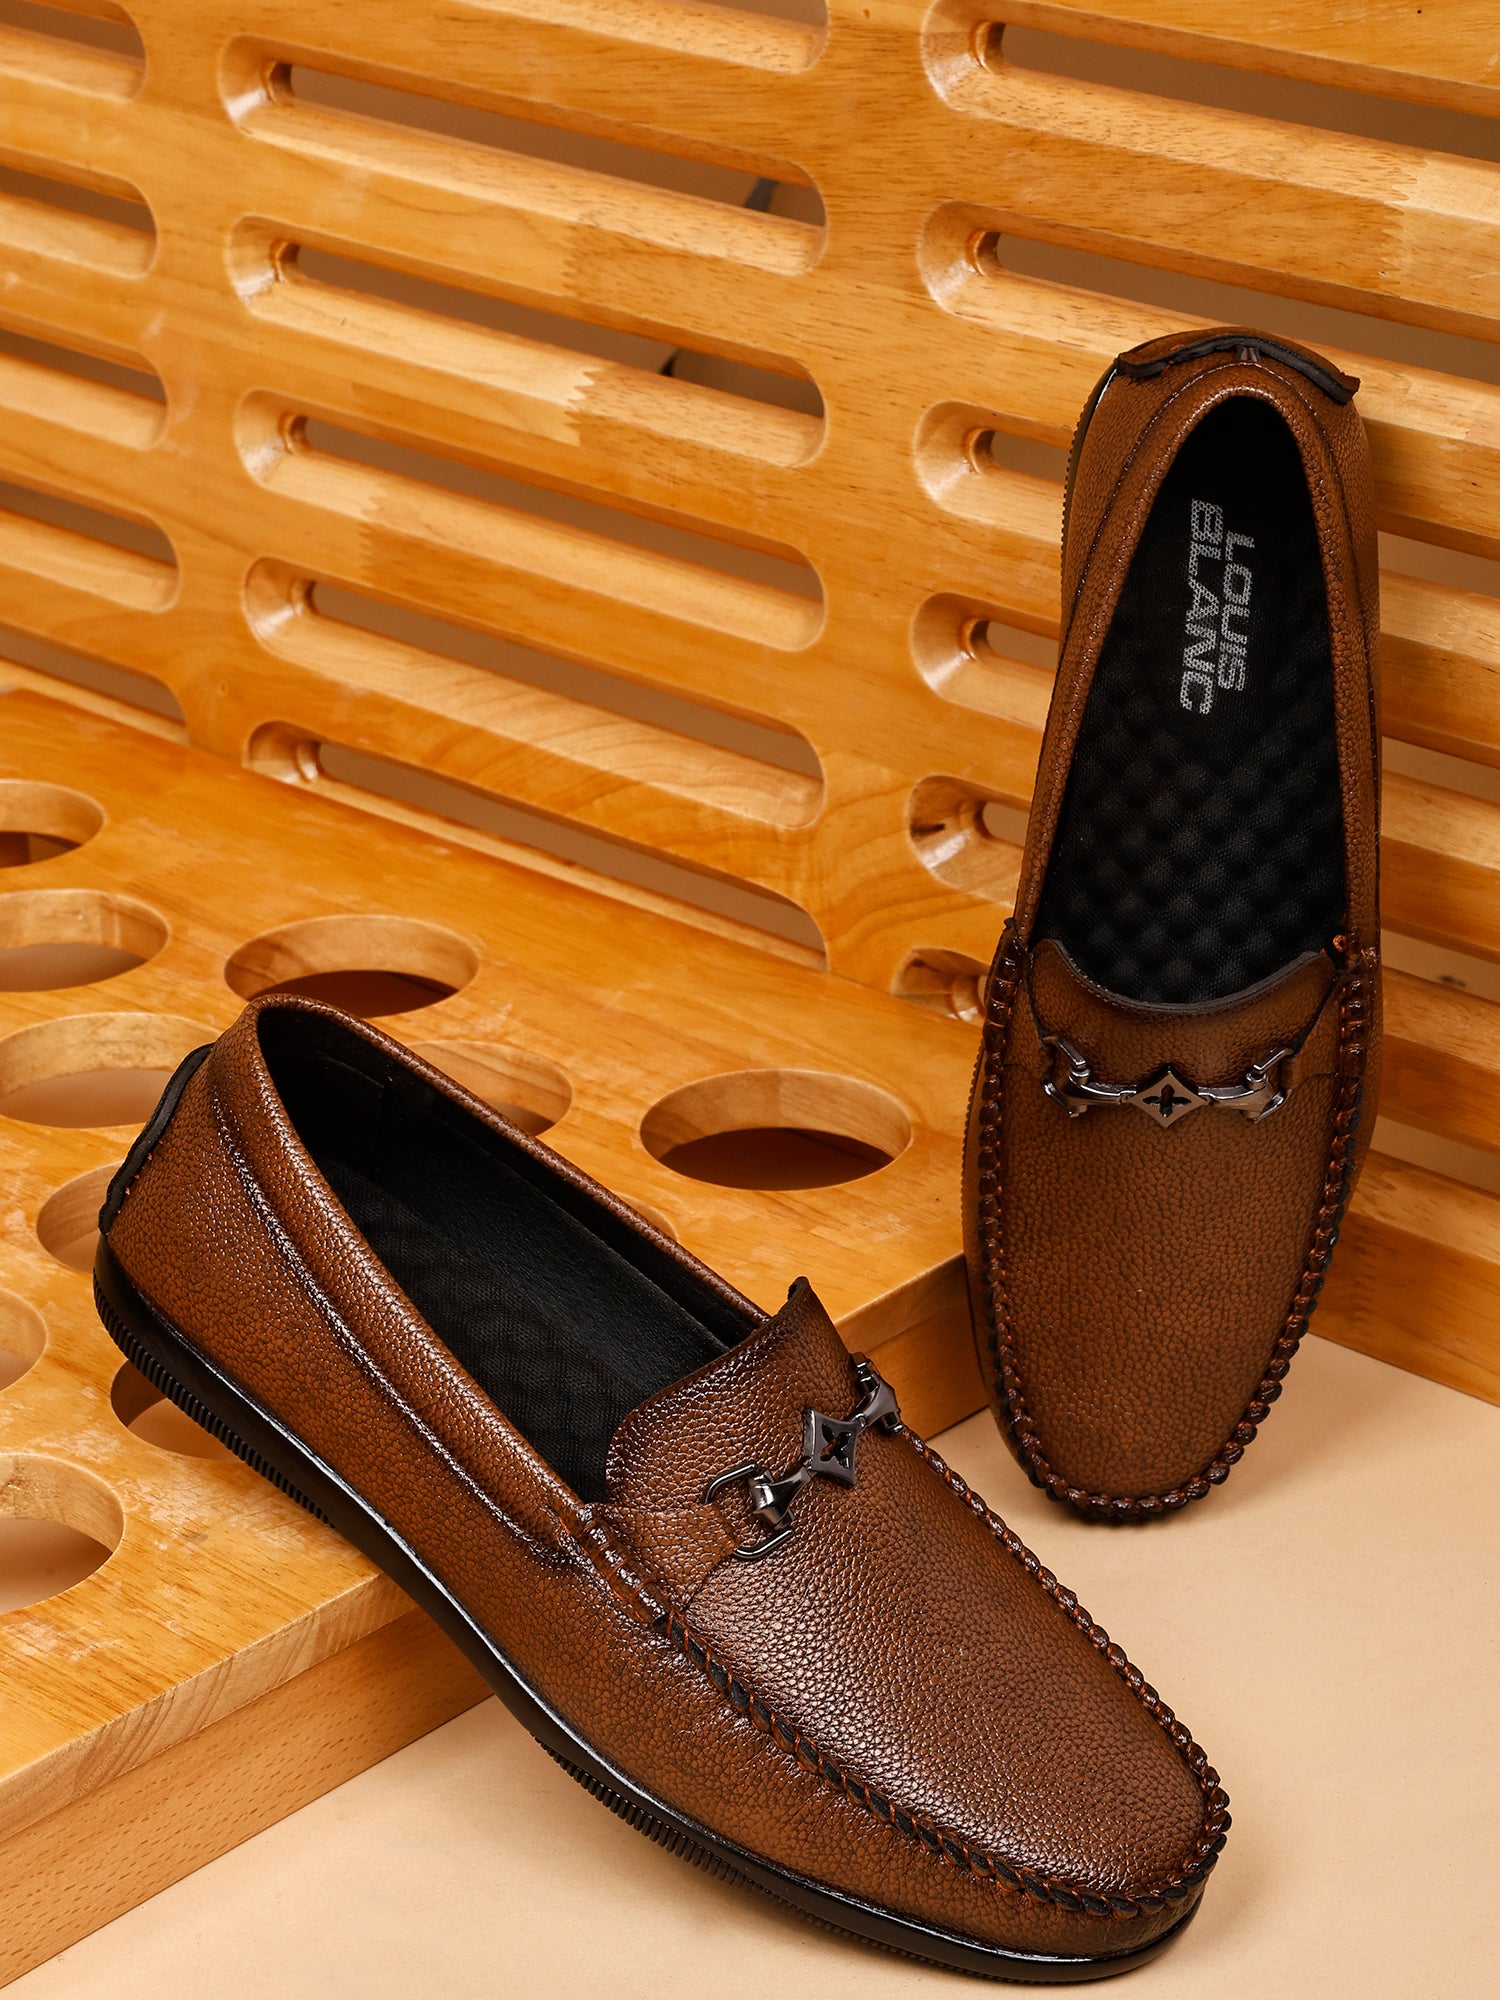 LB 38B DARIO Tan Slip On Style Loafer Most Comfortable Doctor Insole With Wrinkle Free Fox Leather Loafers.